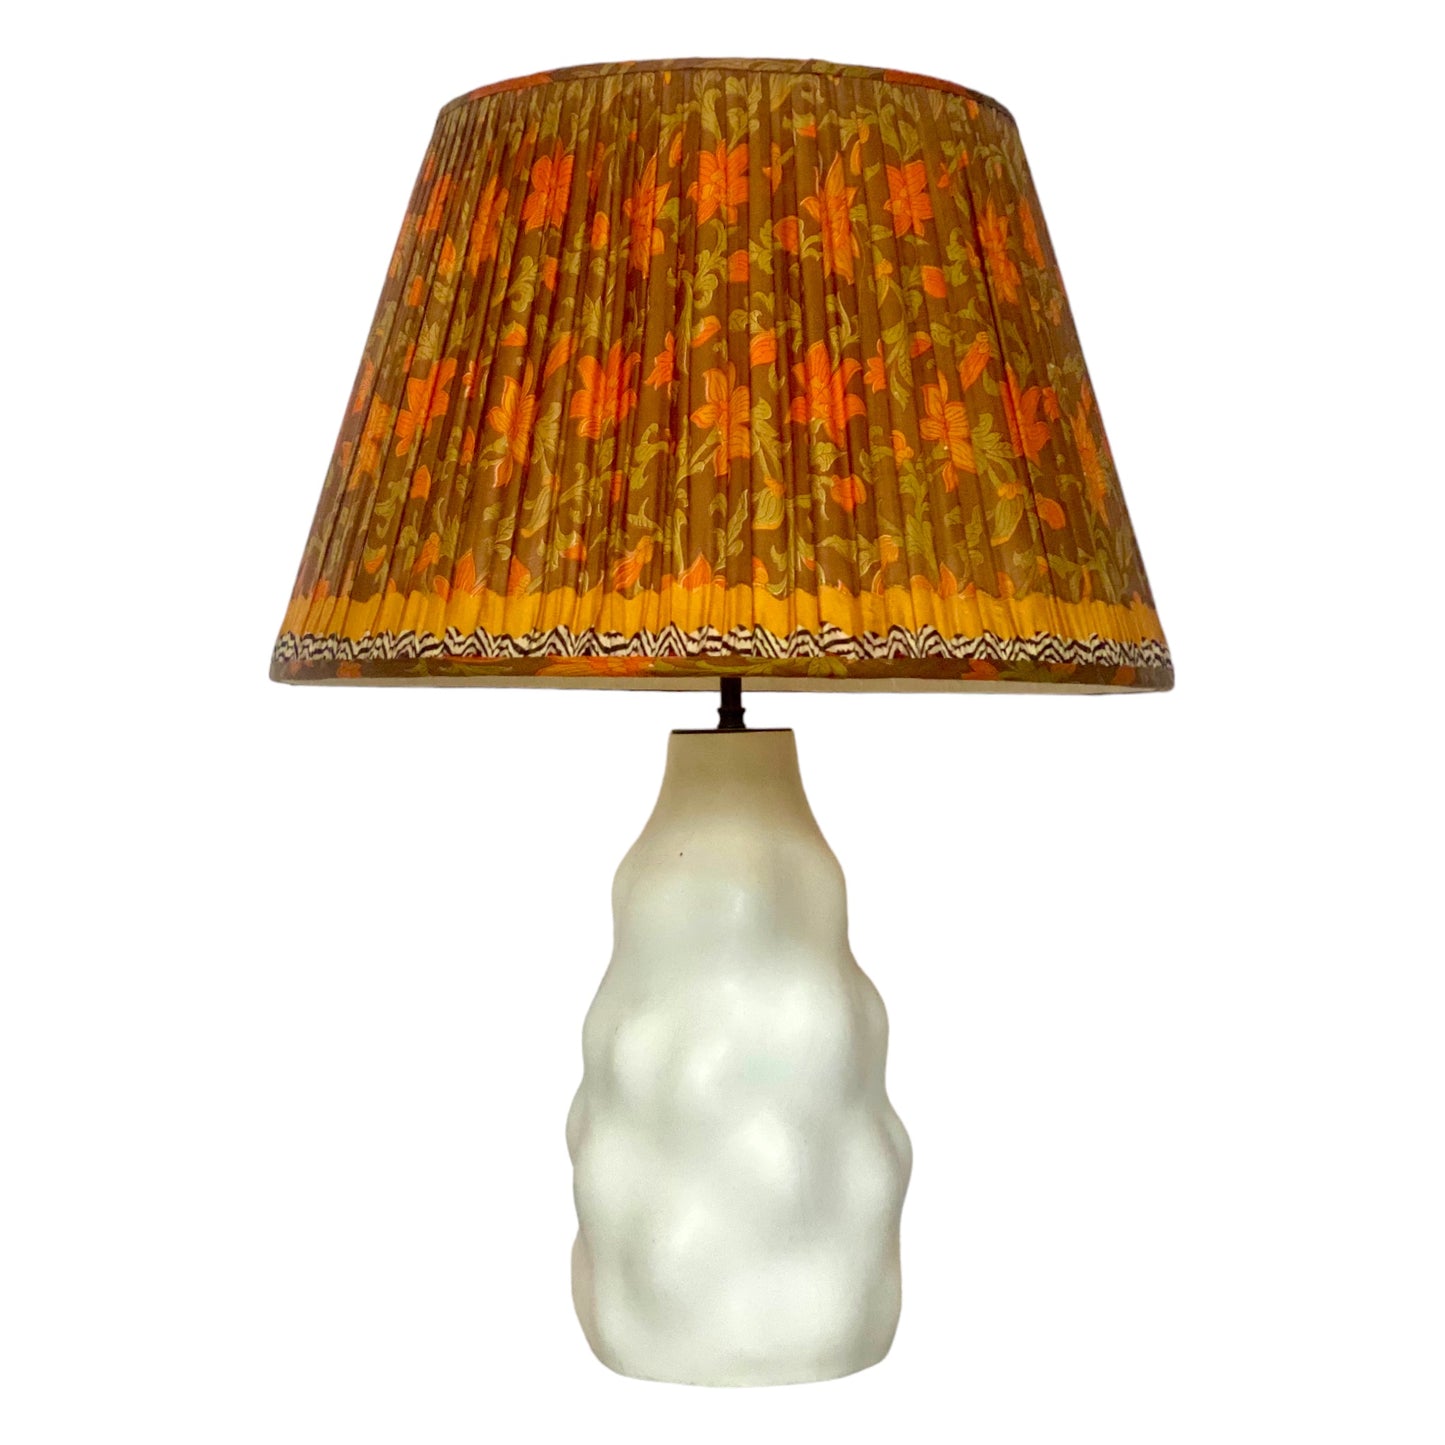 Orange and olive floral lampshade with Iki lamp